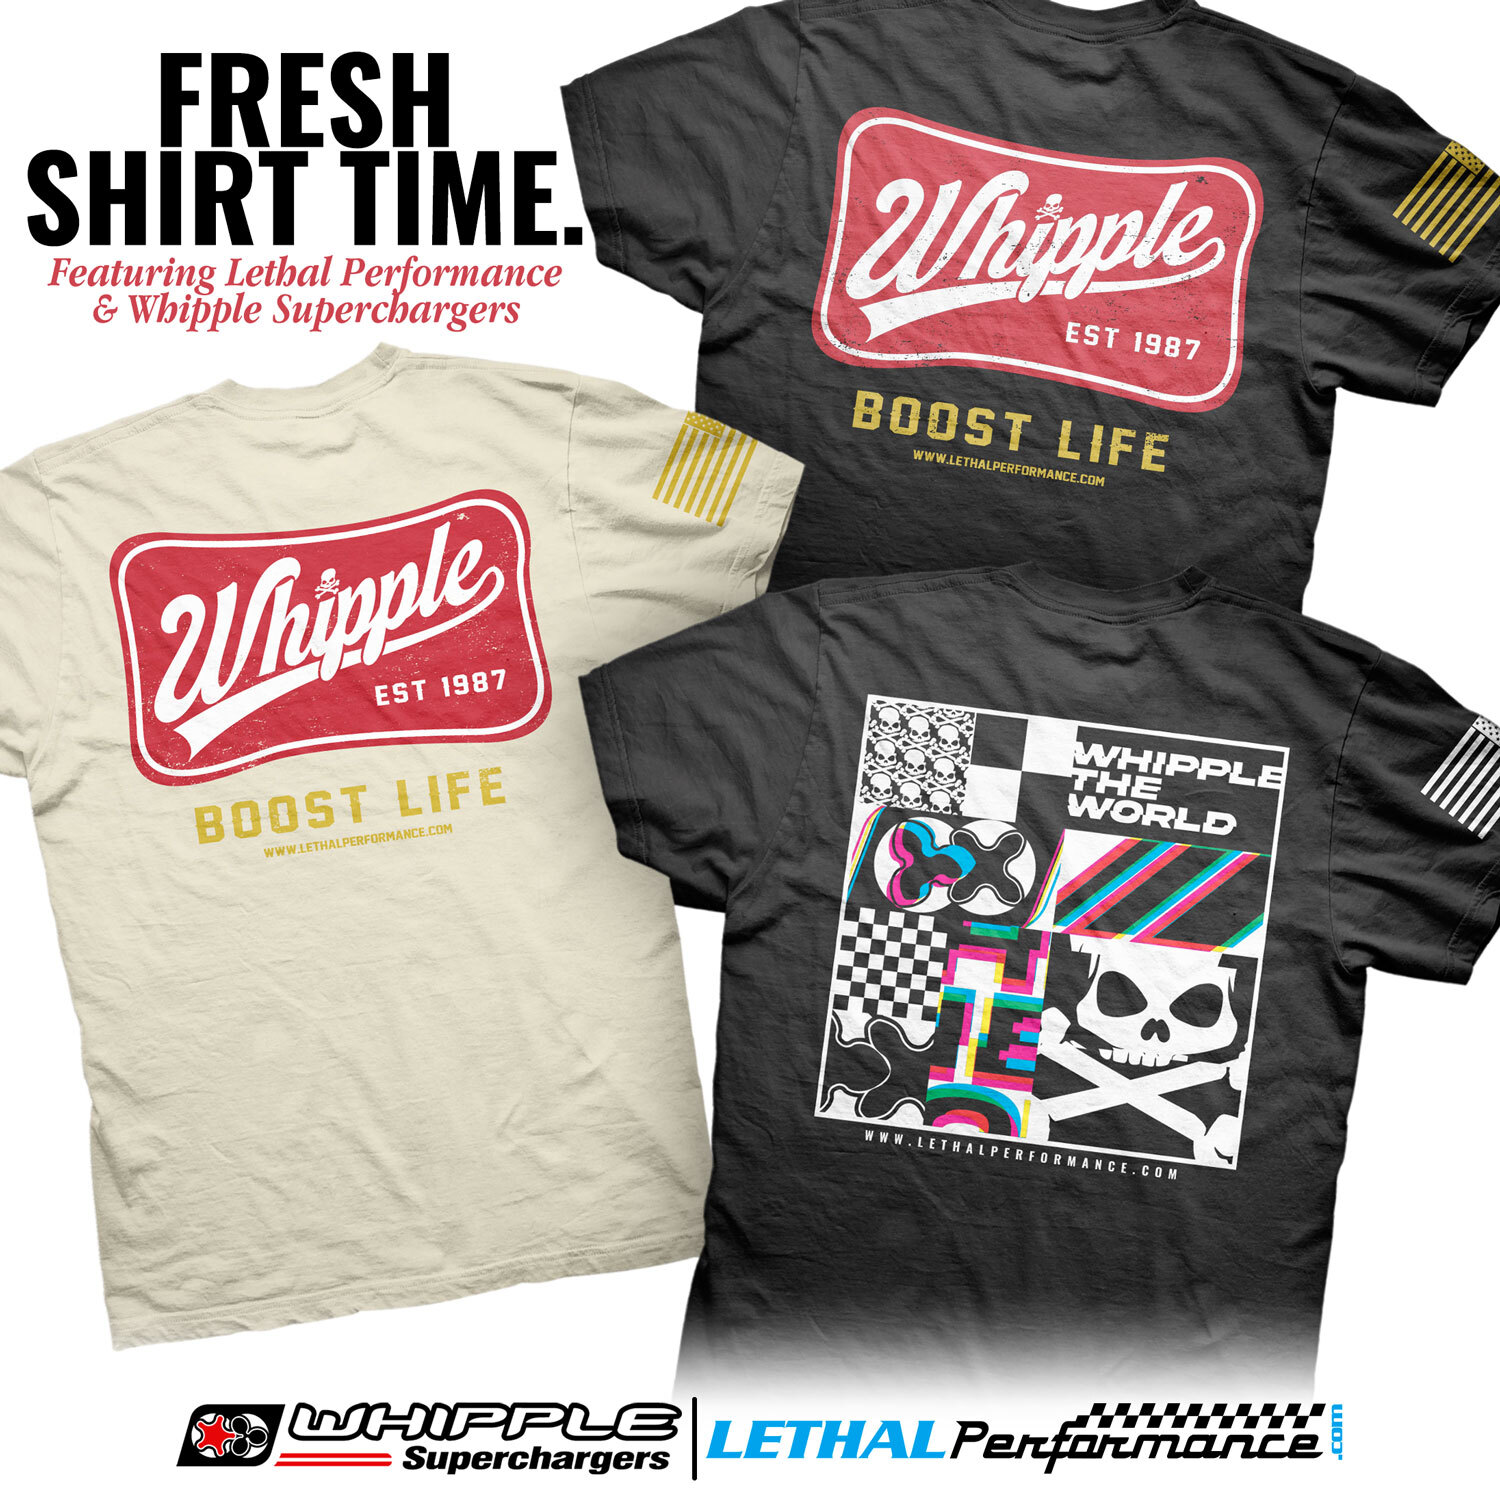 Ford Bronco NEW Lethal Performance MERCH ft. Whipple Superchargers! Check it out!! whippleshirts